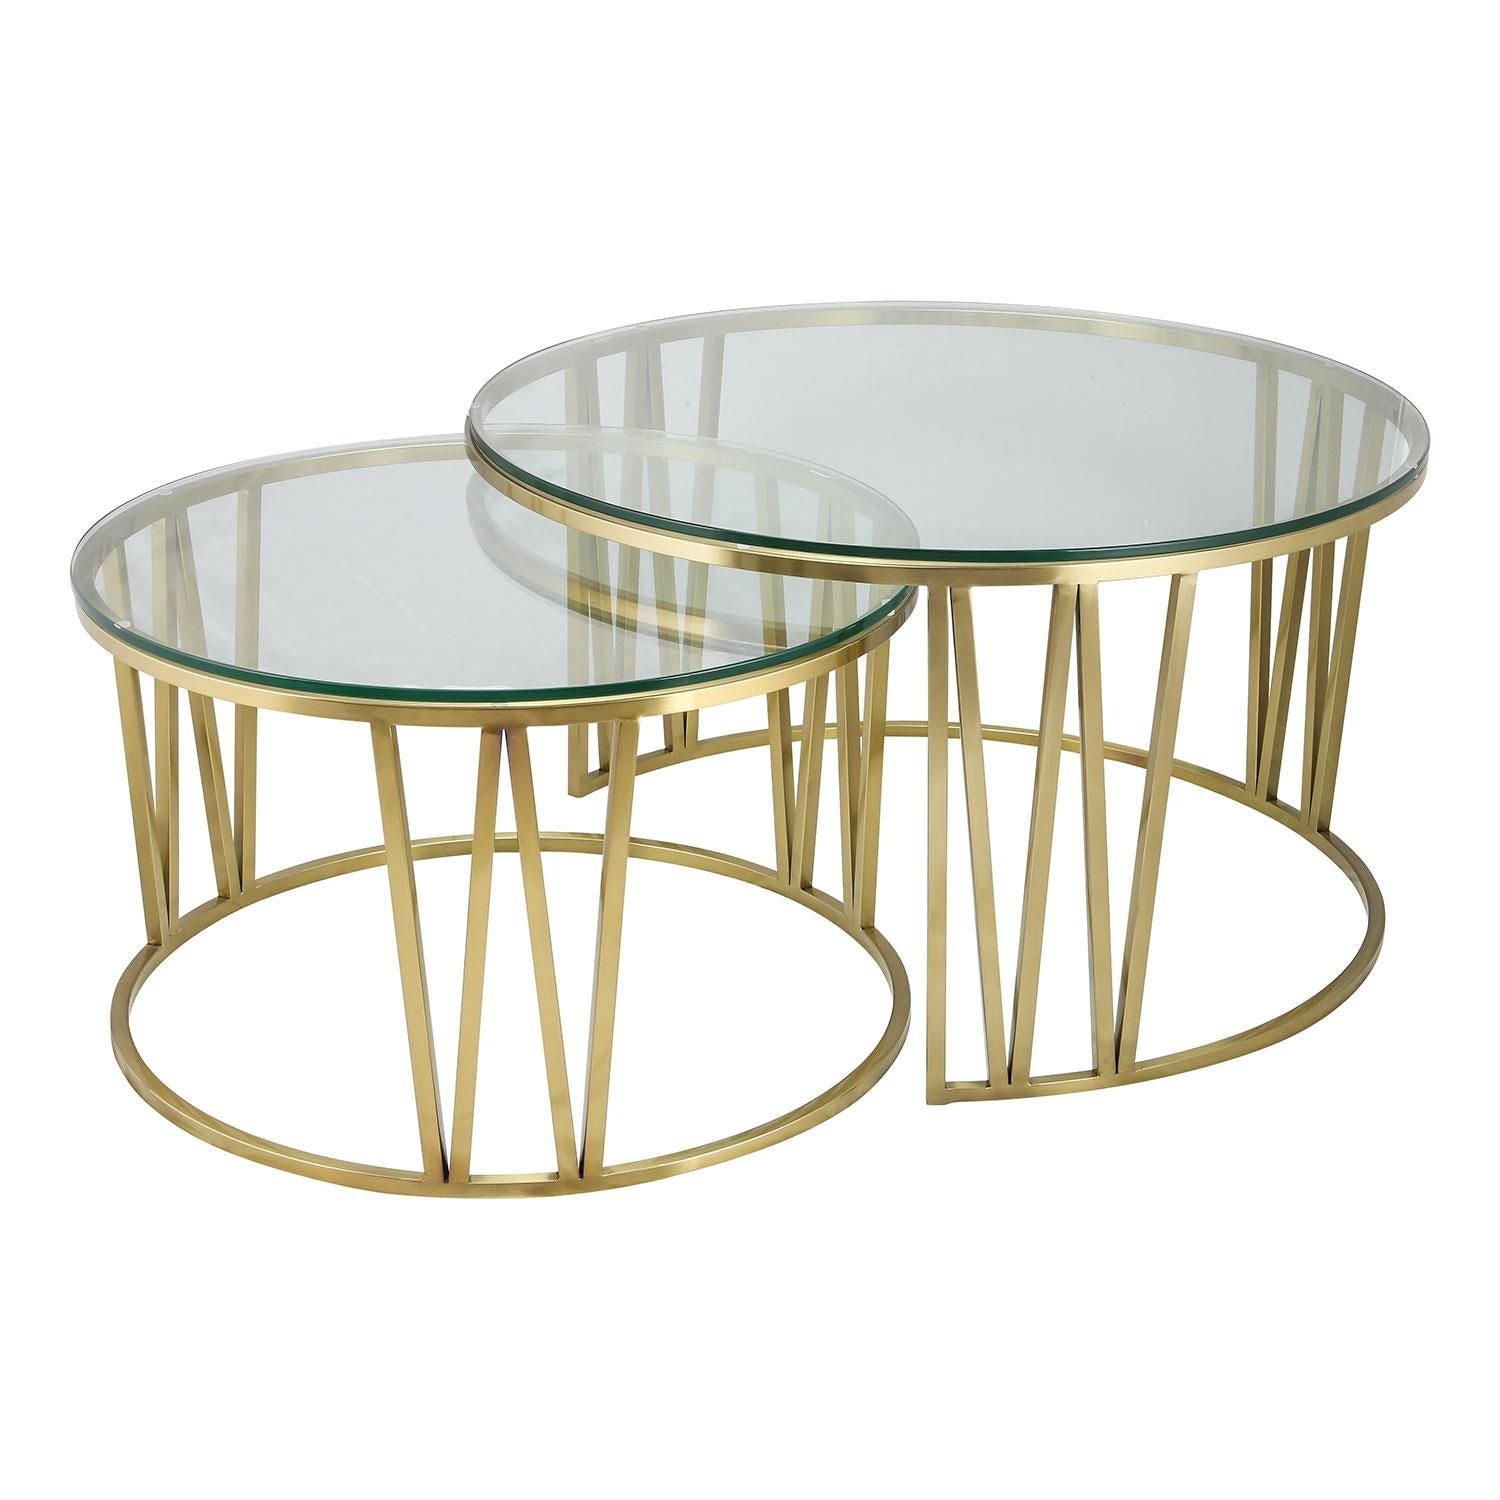 Drum Gold Coffee Table Glass Top Home, Office, Garden online marketplace